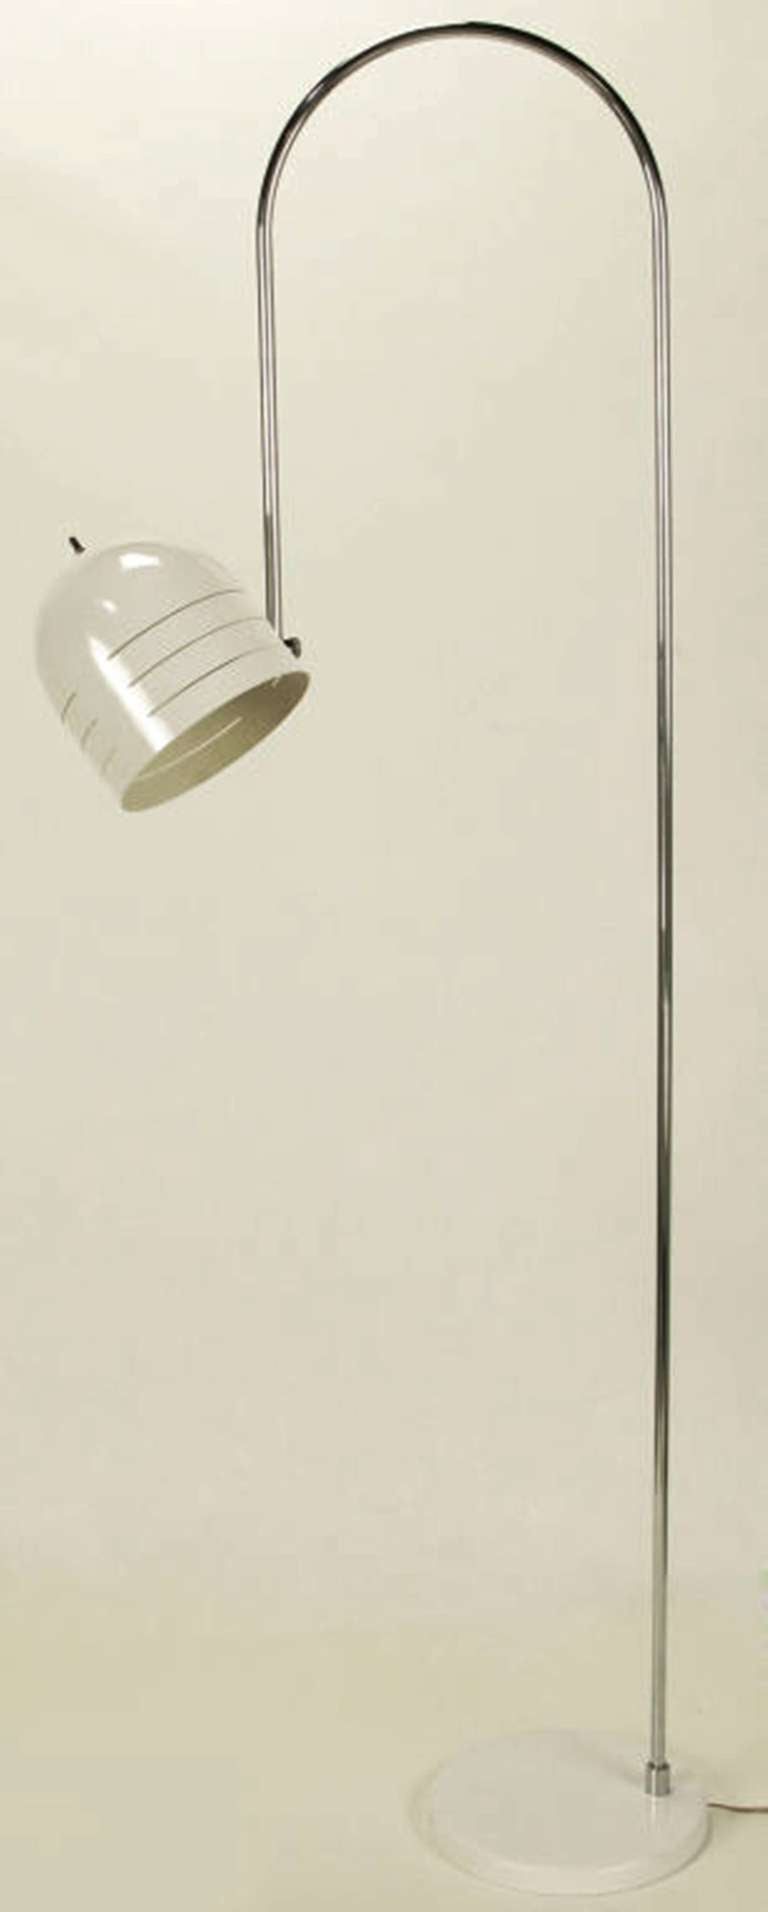 Italian floor lamp, possibly a Sarfatti design, with chromed arched arm and white enameled dome shade with incised detail. Articulated ball joint and pivoting bar on arched arm. White enameled metal base.